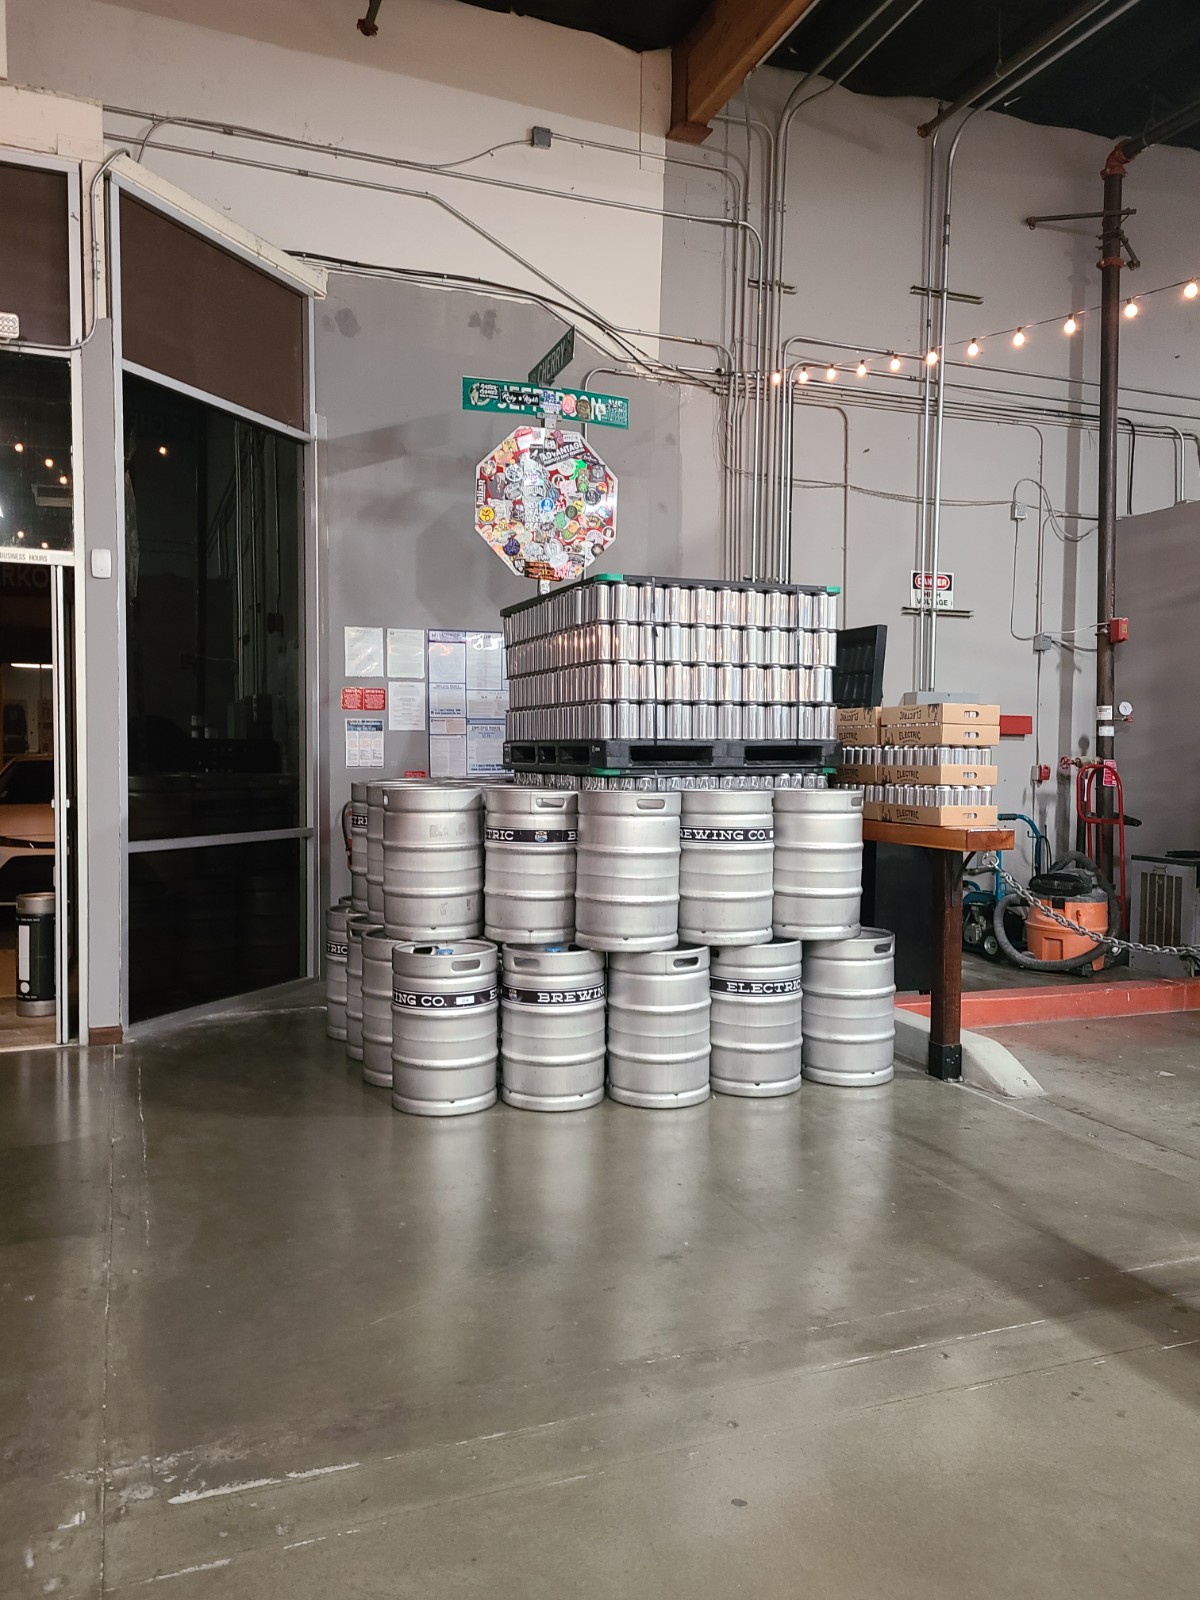 Electric Brewing Company - Tasting Room